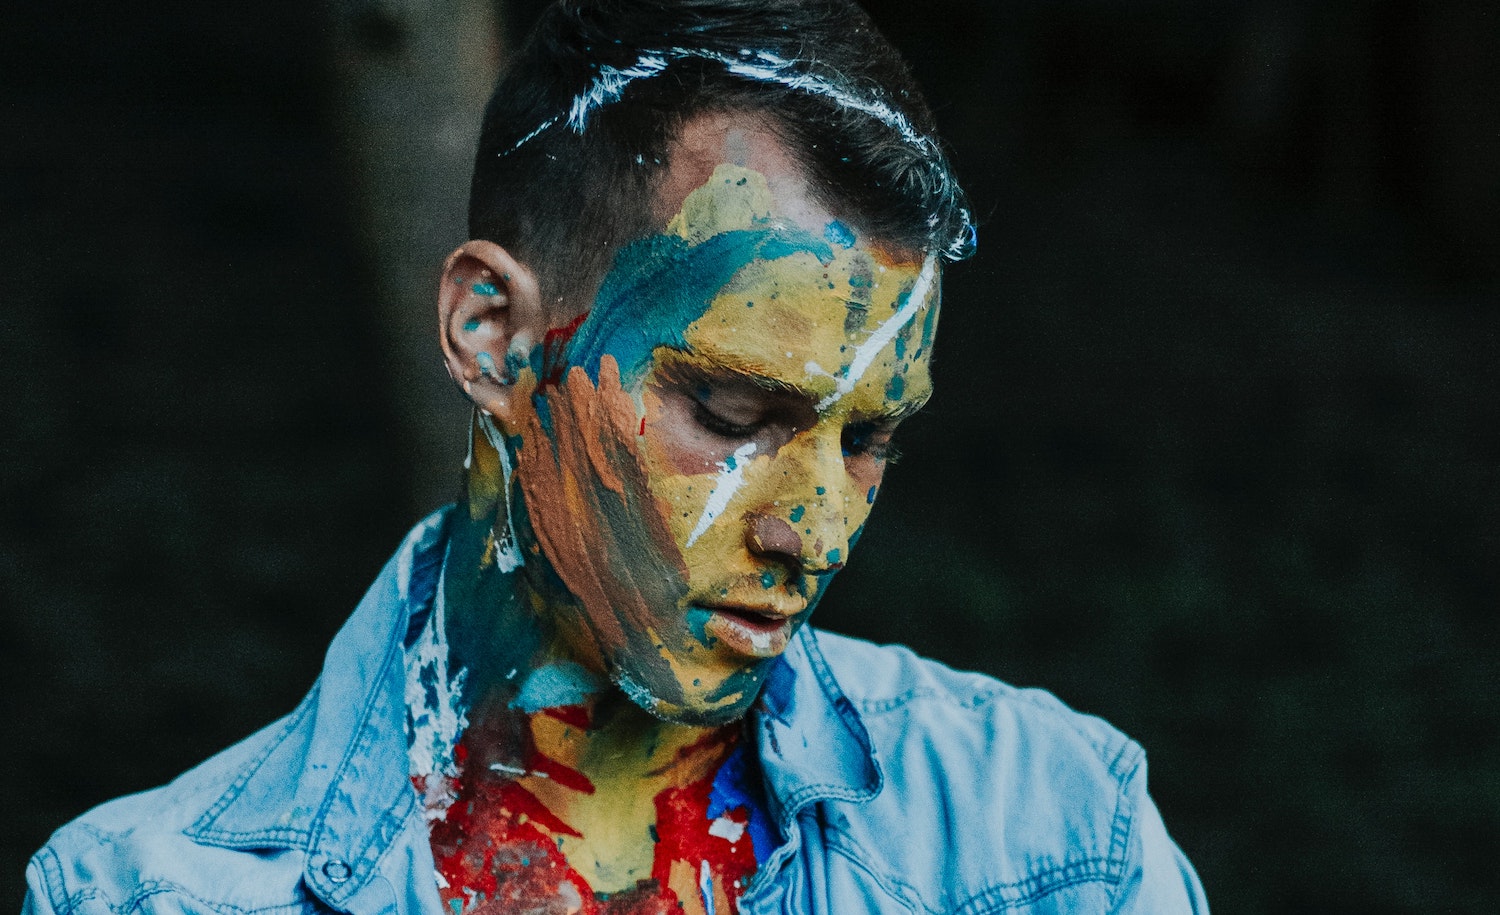 A sensitive man with paint on his face looking down in deep thought, with a dark background